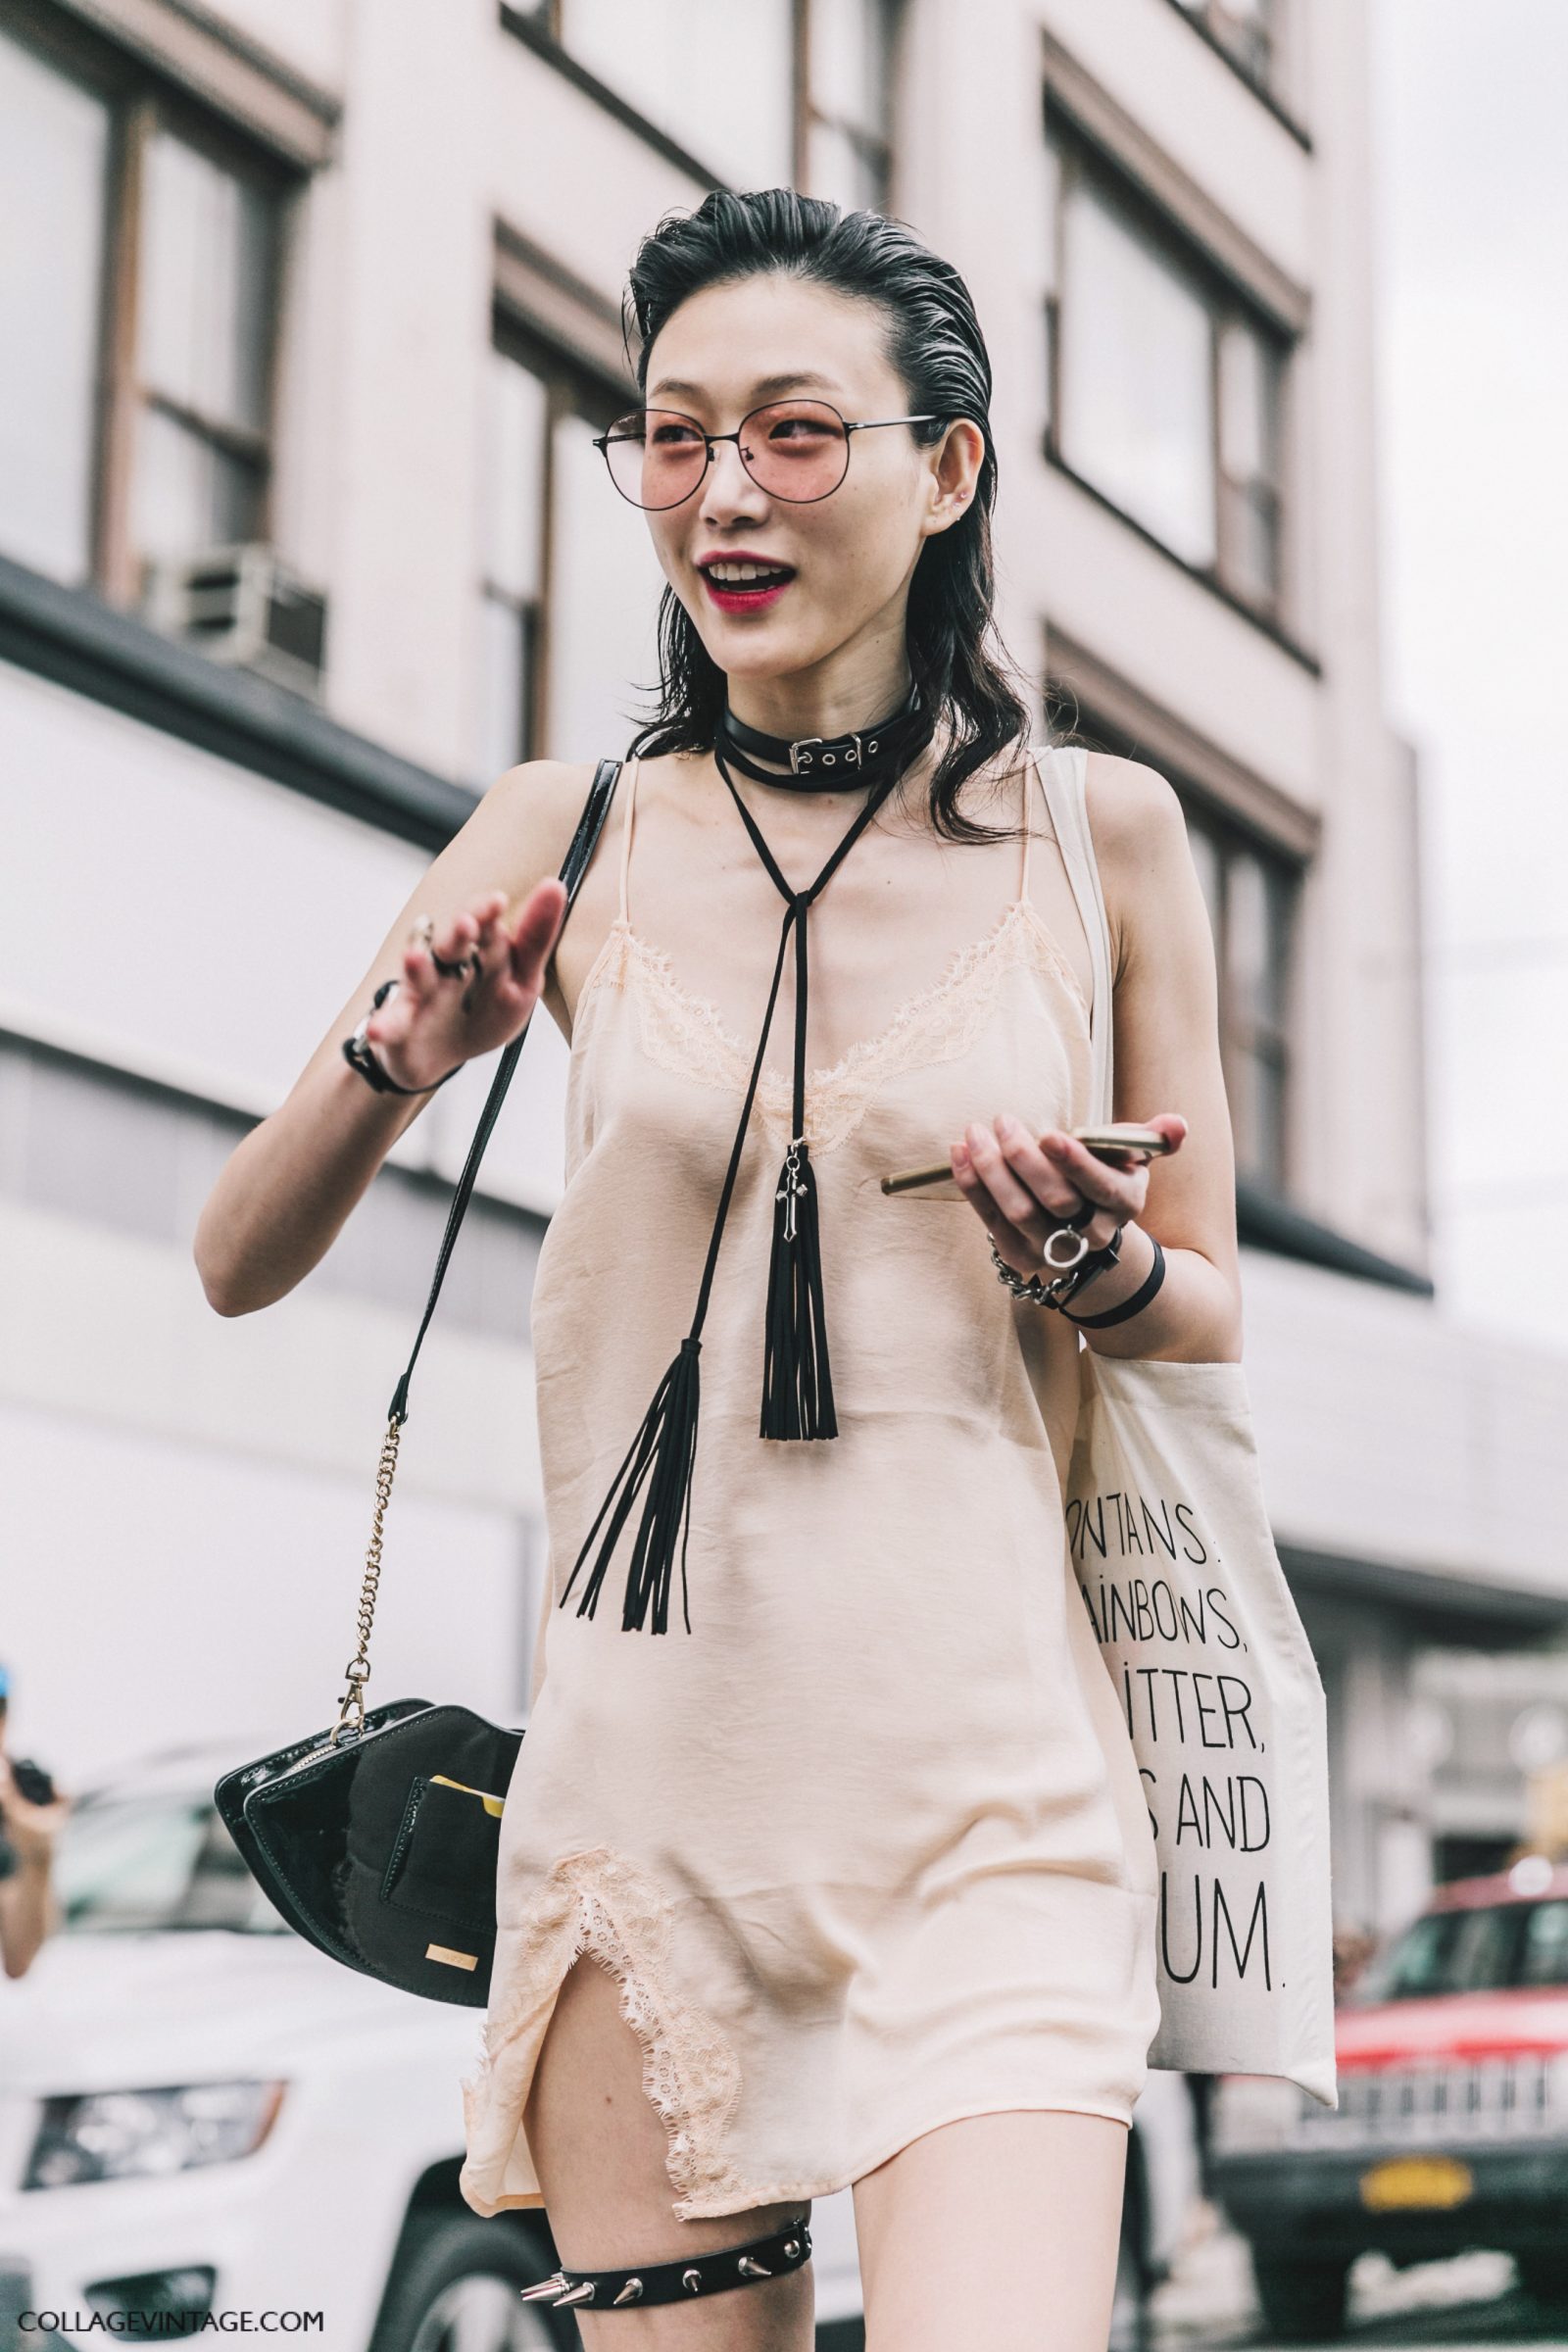 nyfw-new_york_fashion_week_ss17-street_style-outfits-collage_vintage-lingerie_dress-over_the_knee_botts-punk_sttyle-chockers-sora_choi-2